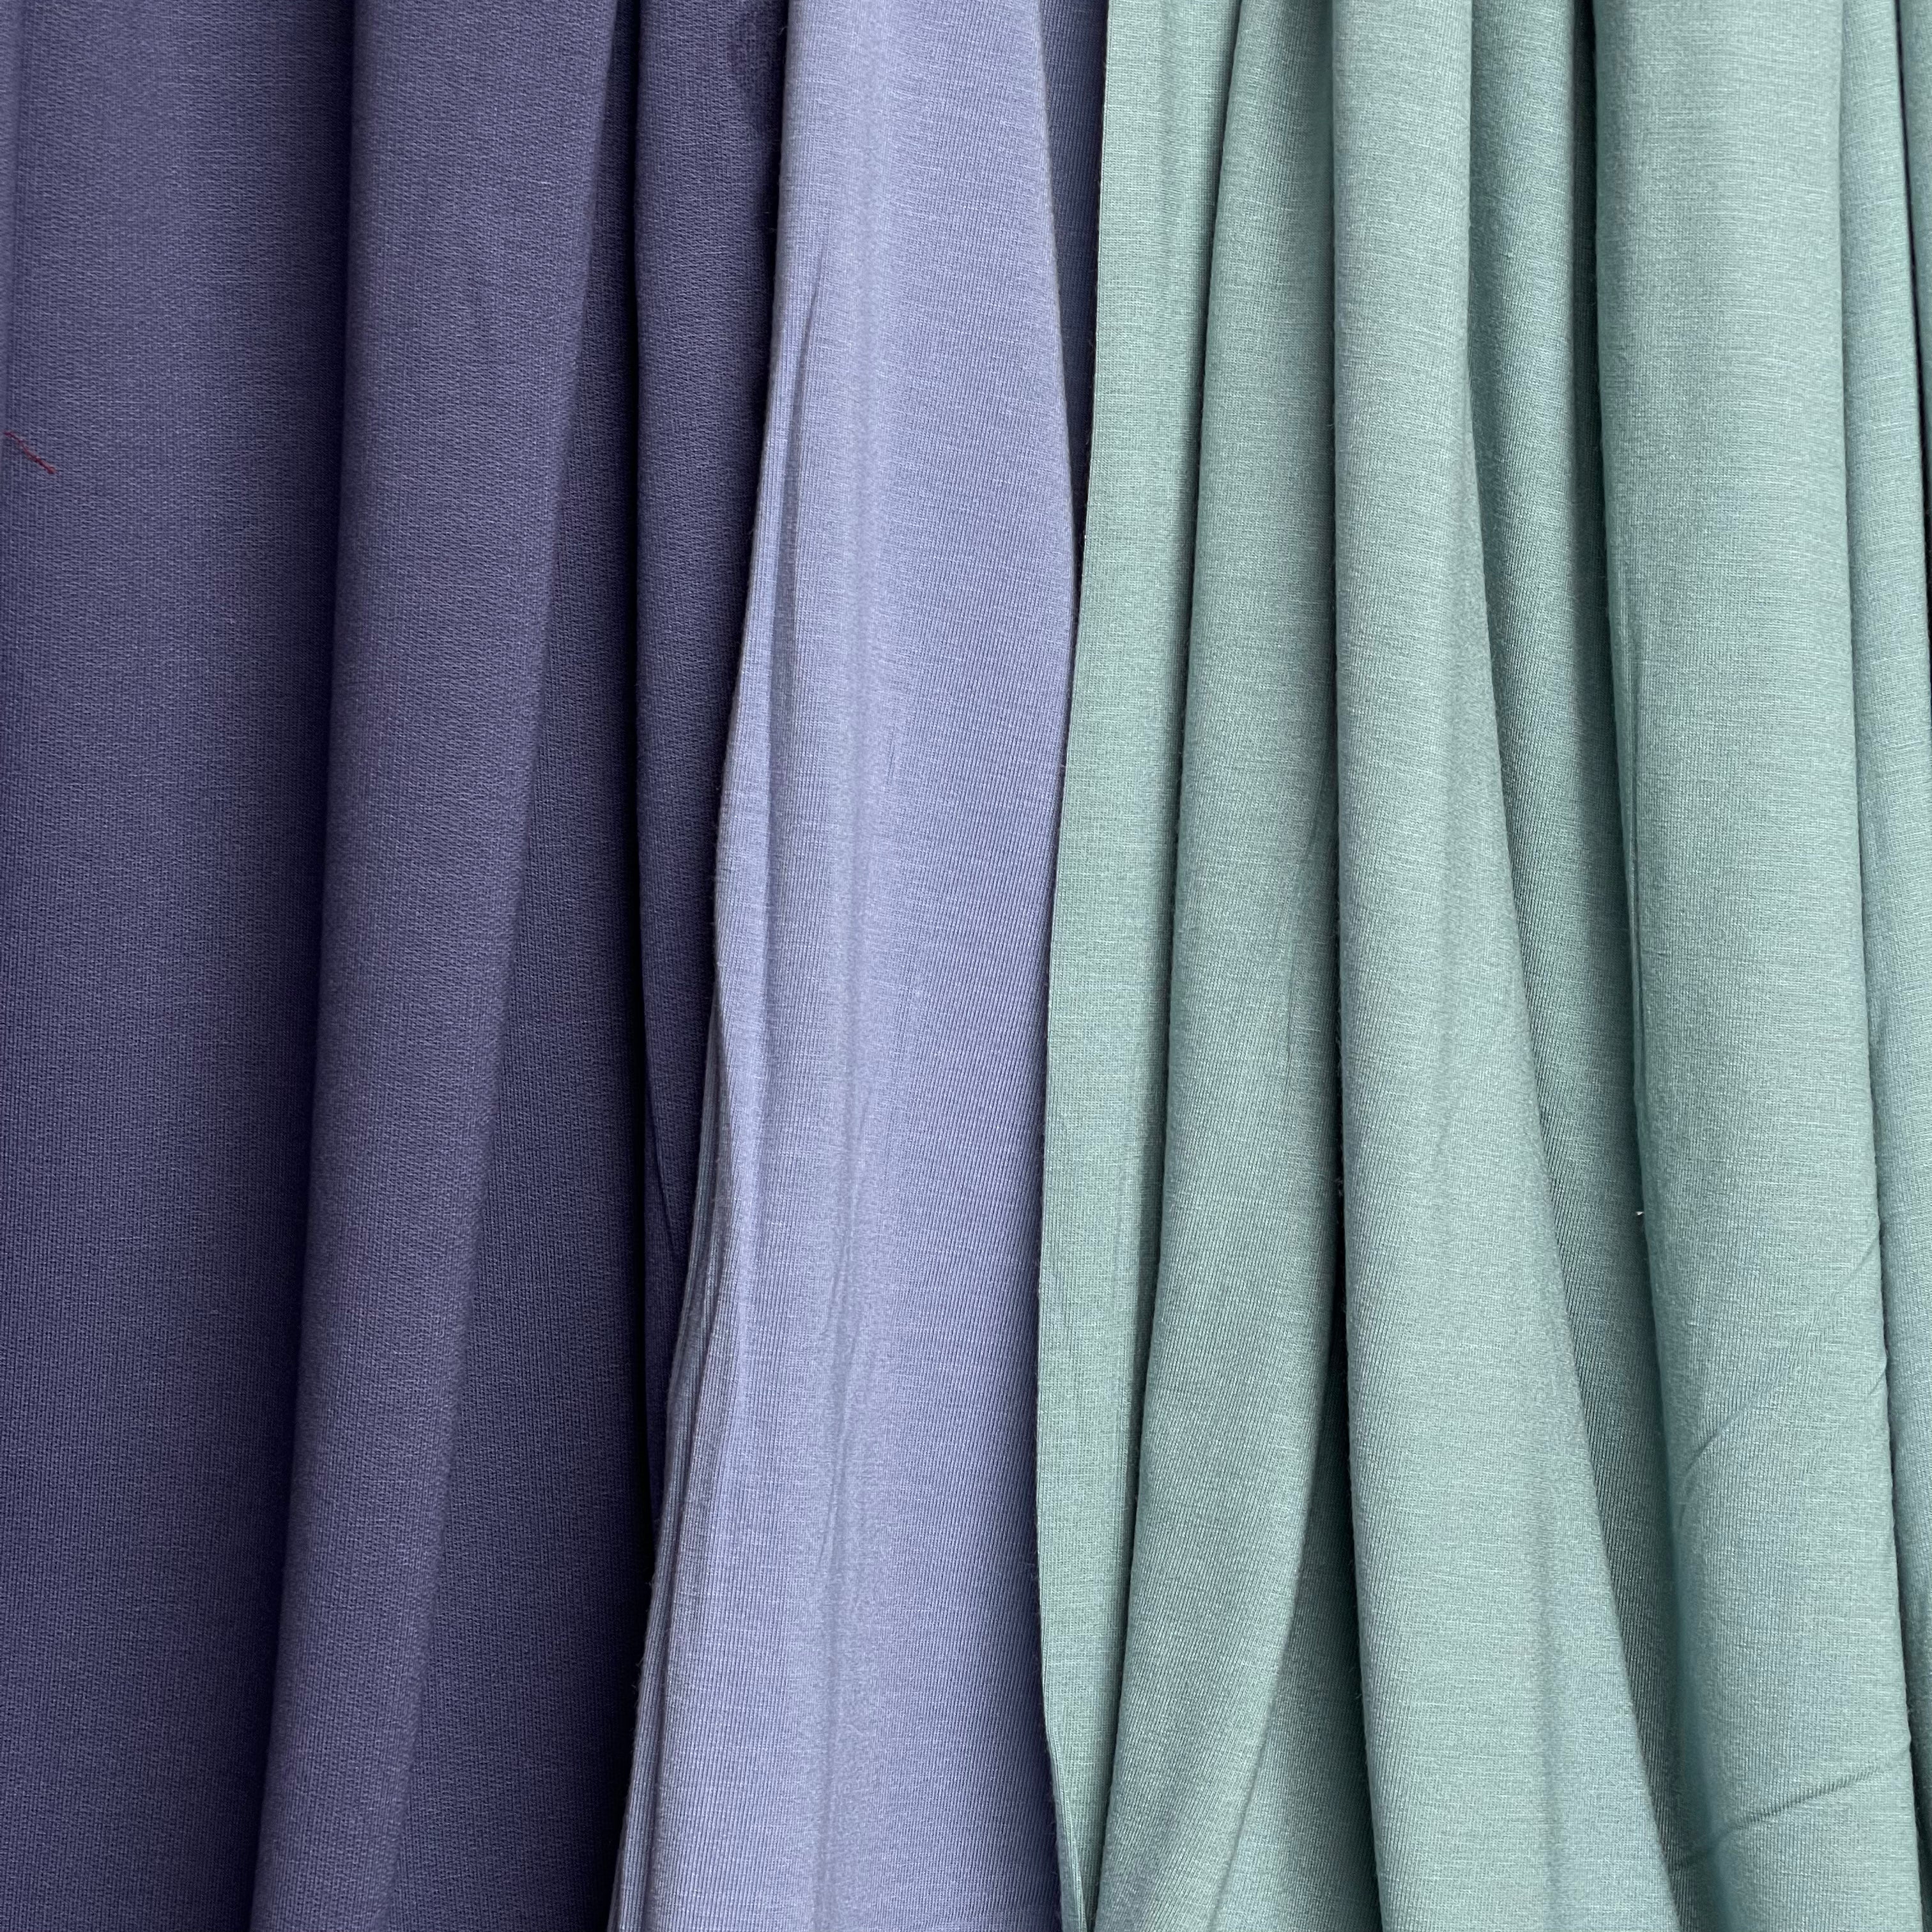 Bliss Light Blue Jersey Fabric with TENCEL™ Modal Fibres